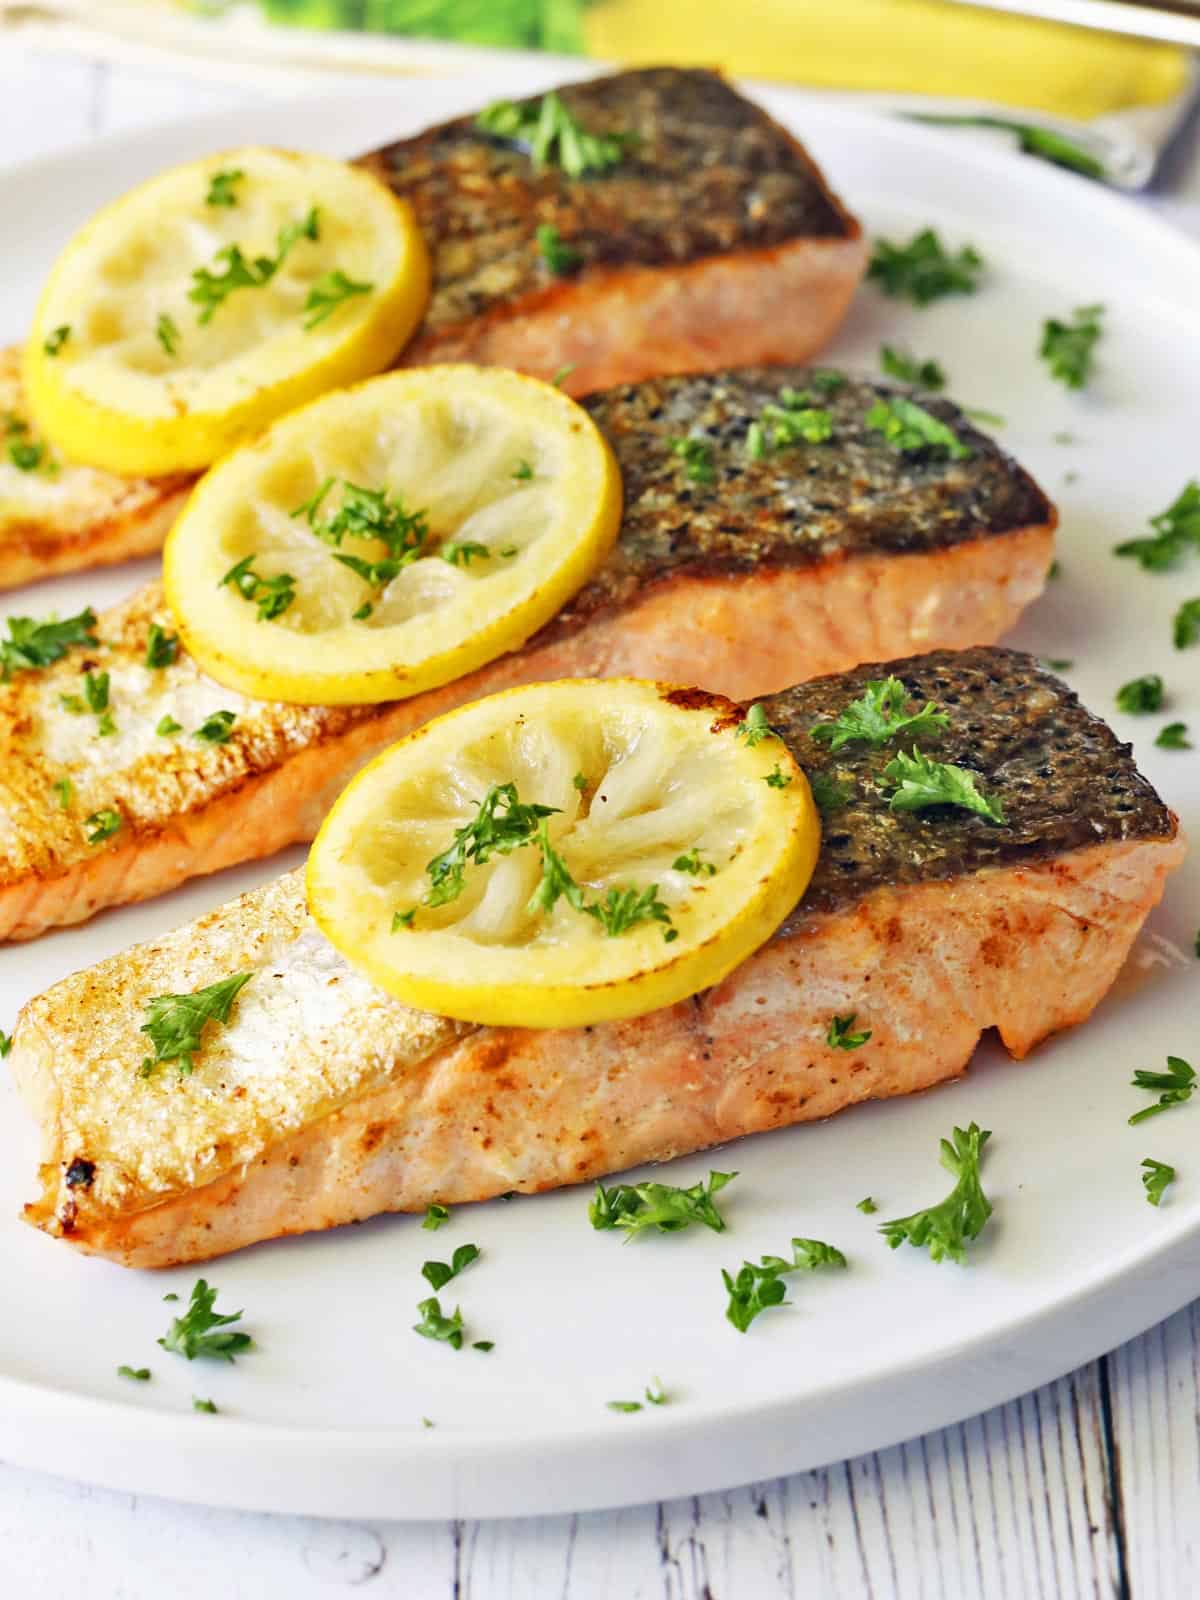 Three pan-fried salmon fillets topped with lemon slices and parsley.